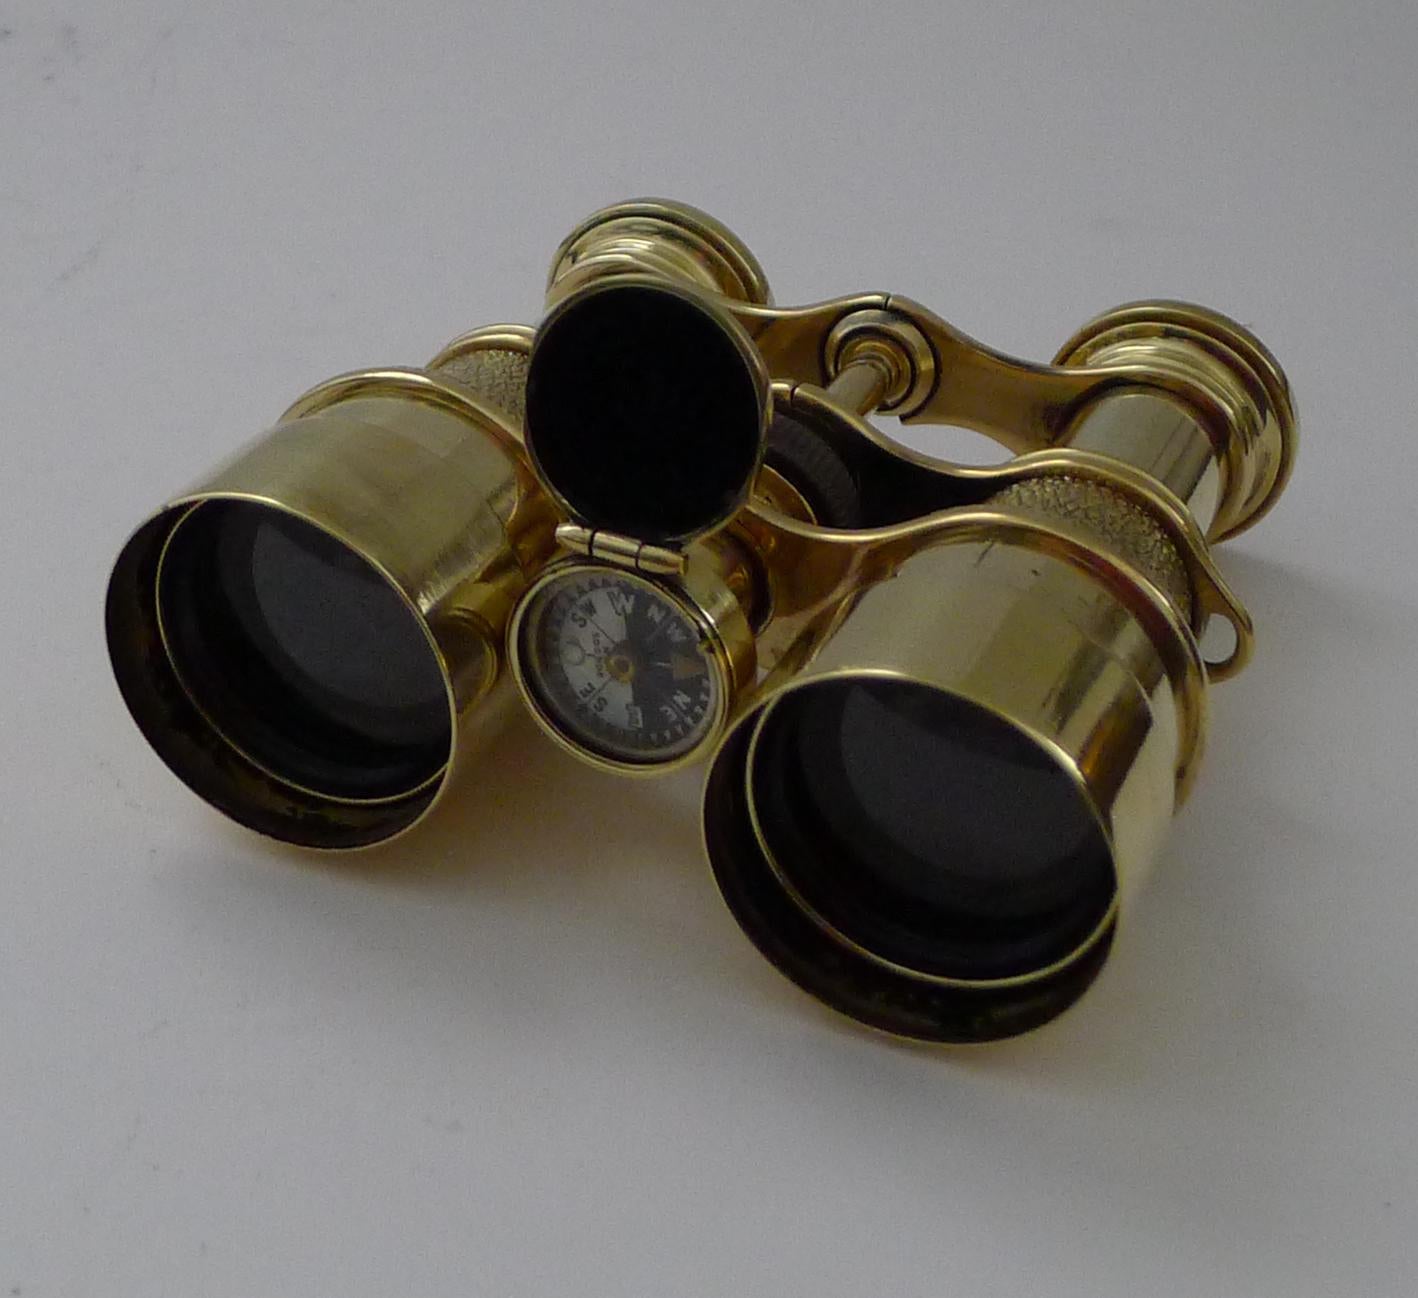 Late Victorian Antique English Field Glasses / Binoculars by Lawrence and Mayo - With Compass For Sale